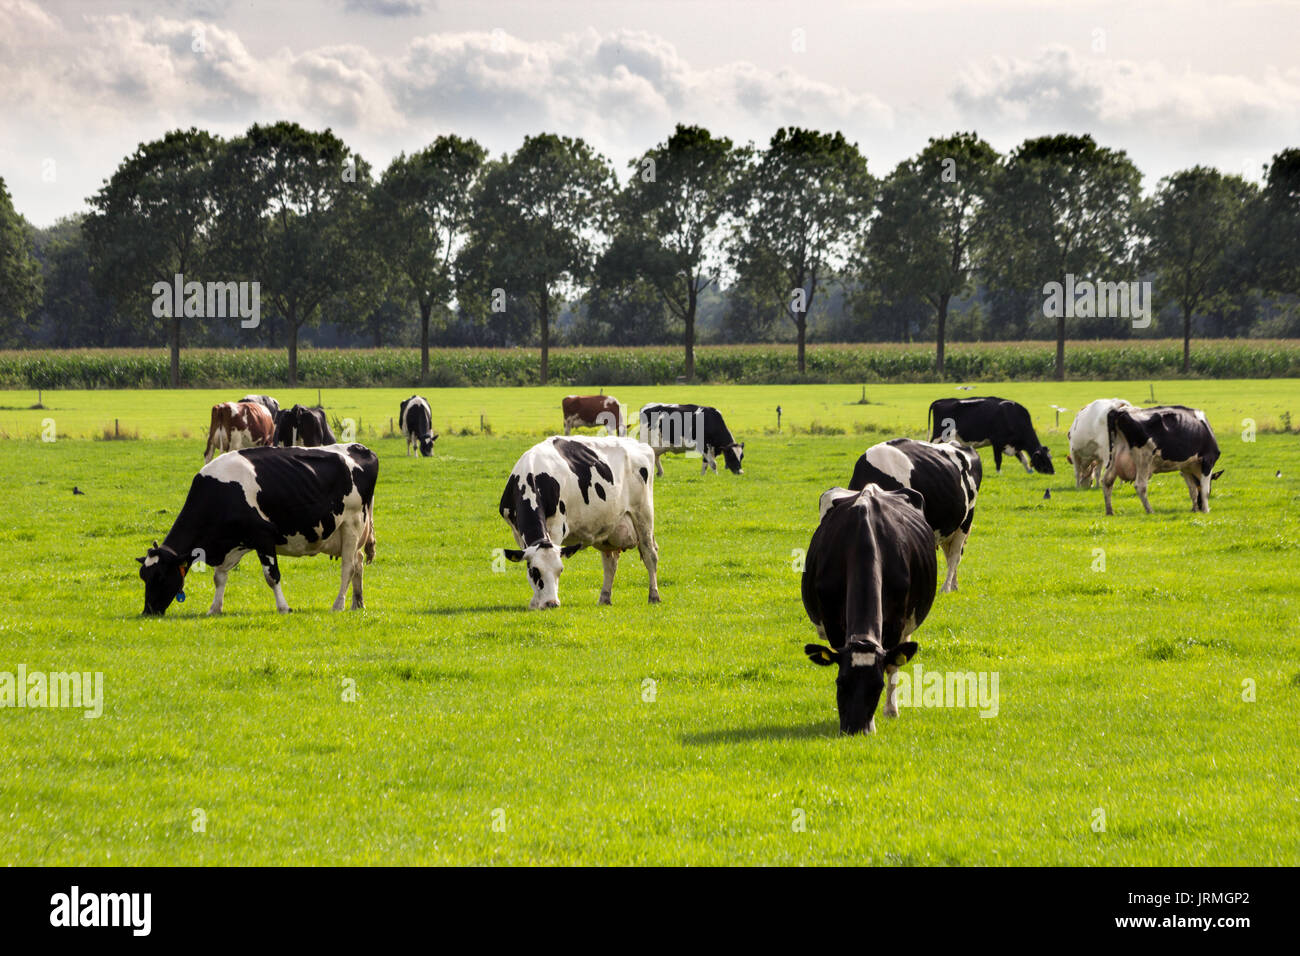 Black and white Holstein Friesian cows grazing in grassland. Stock Photo